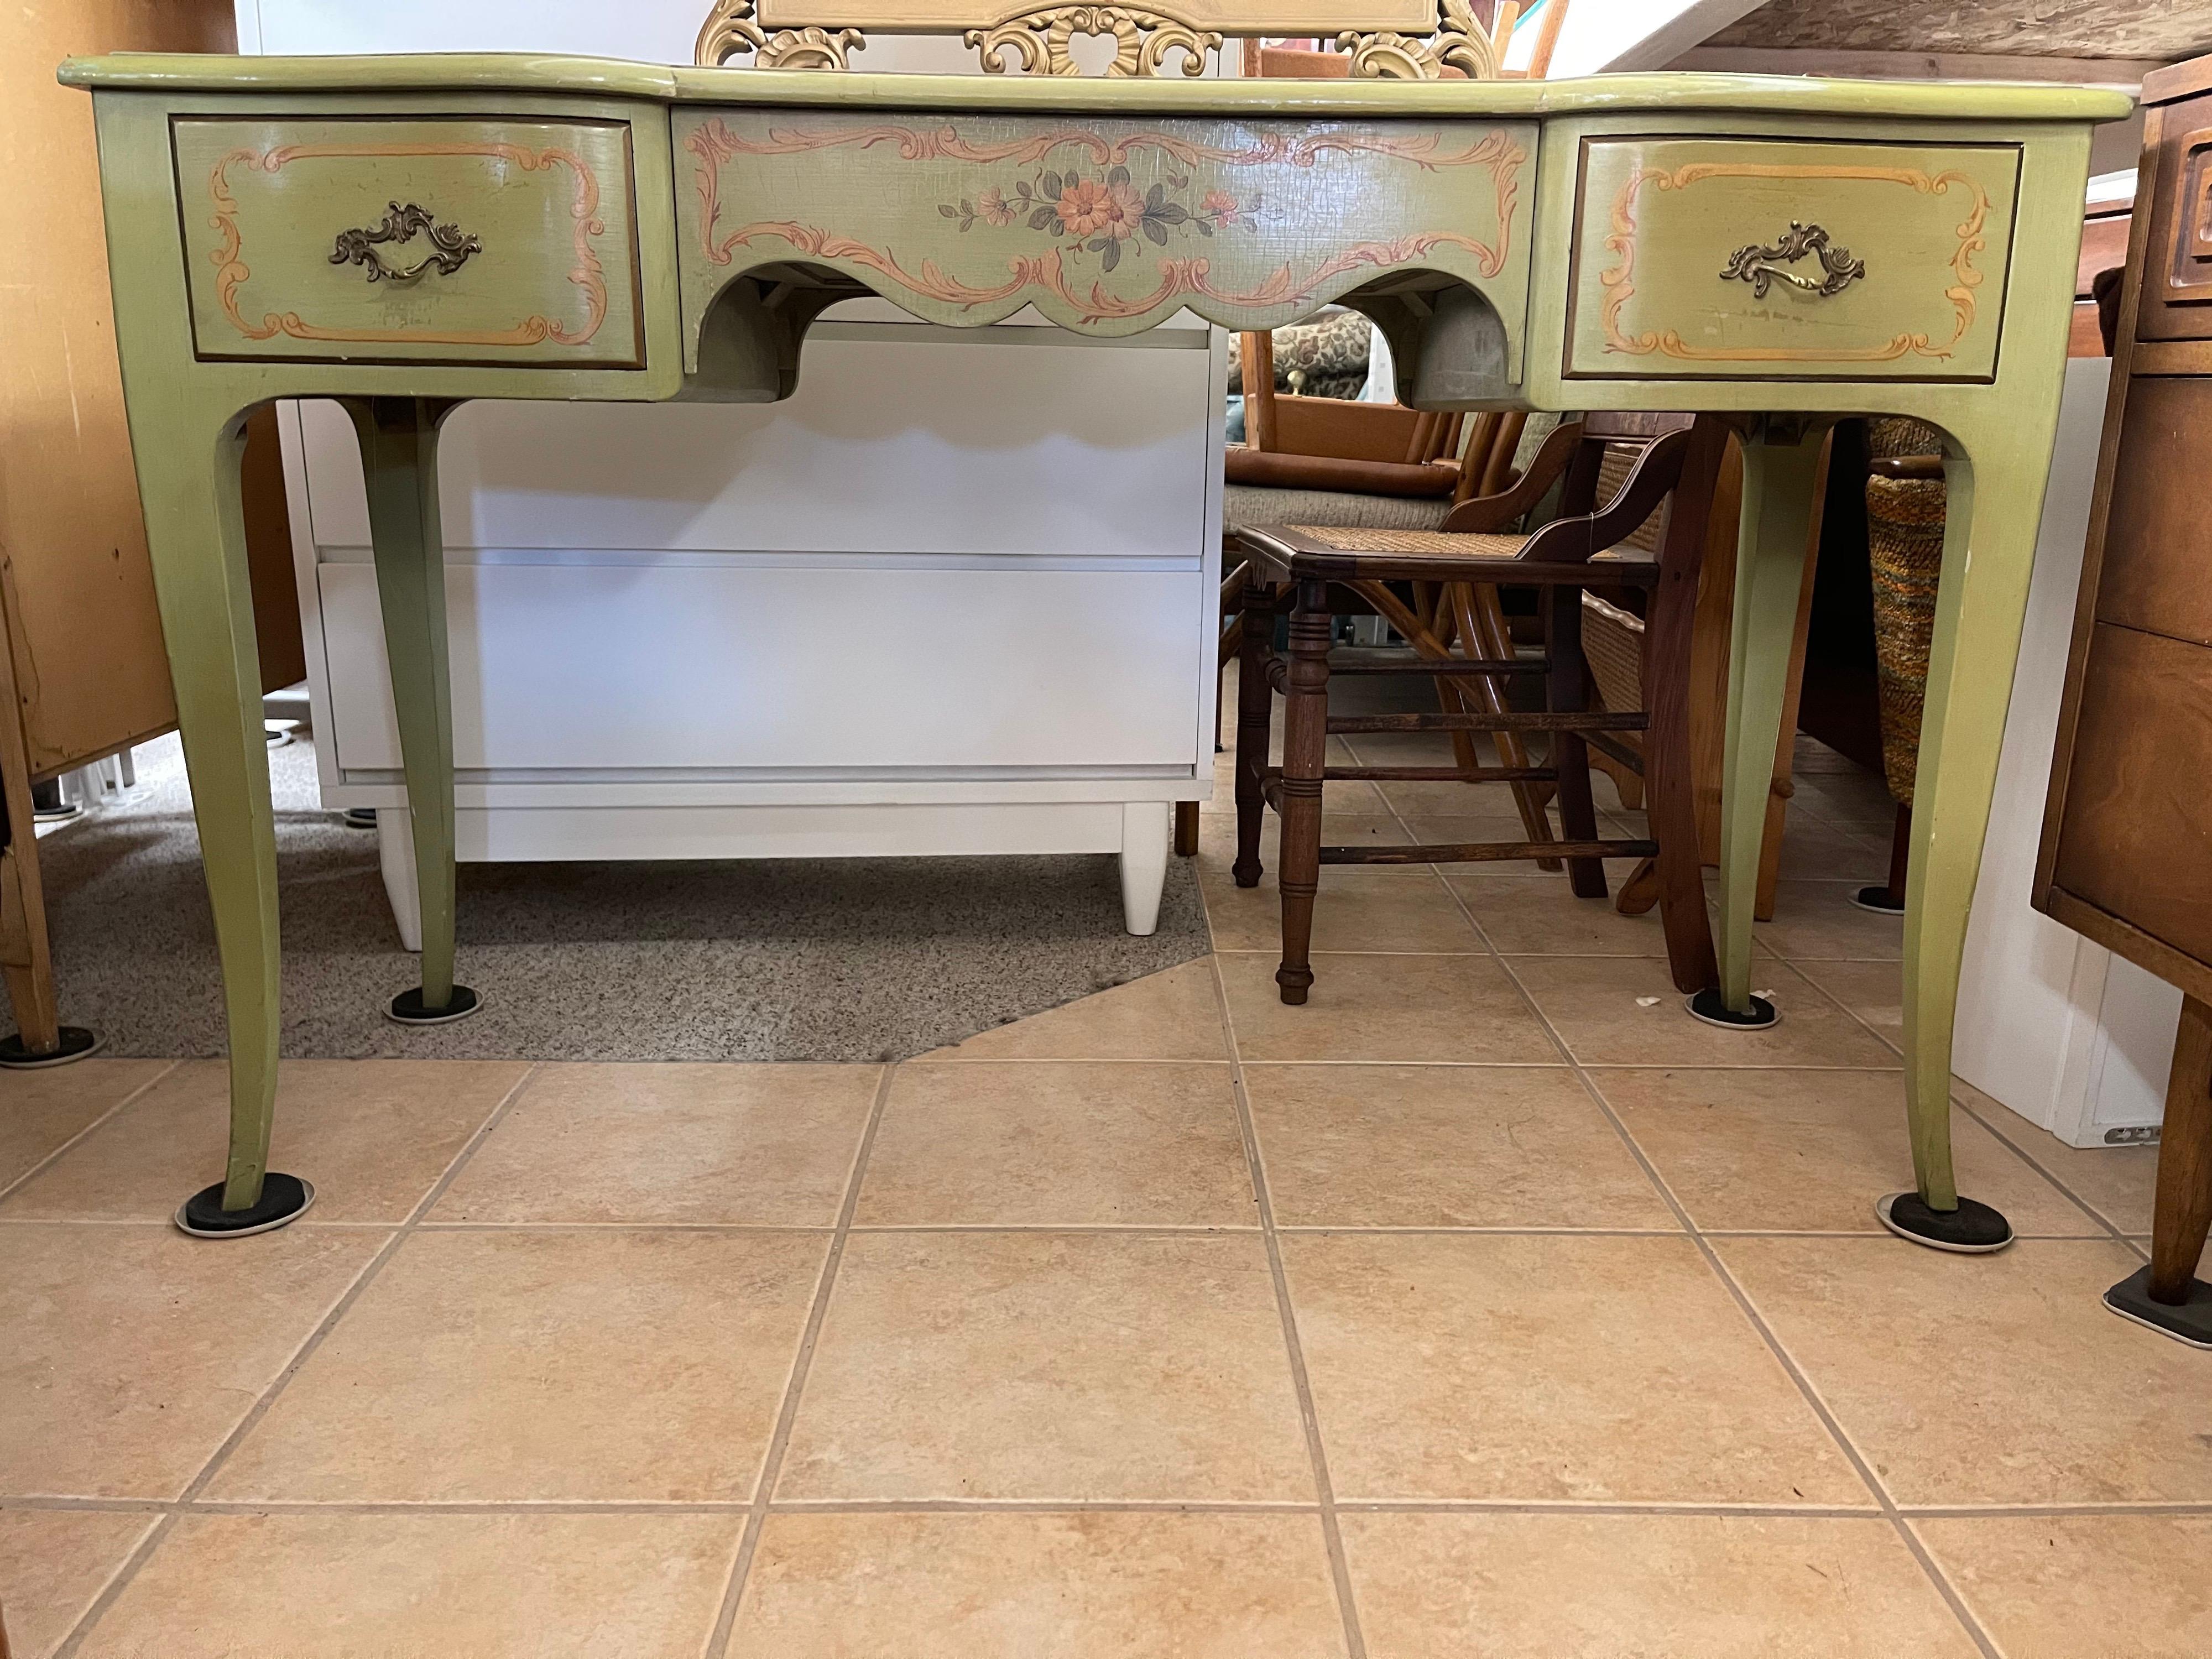 Antique John Widdicomb vanity with stool. Beautiful, hardwood, sturdy vanity with ornate handles, painted flowers in soft pastel hues. Lovely workmanship, modern furniture cannot compare to the old world designs, quality and